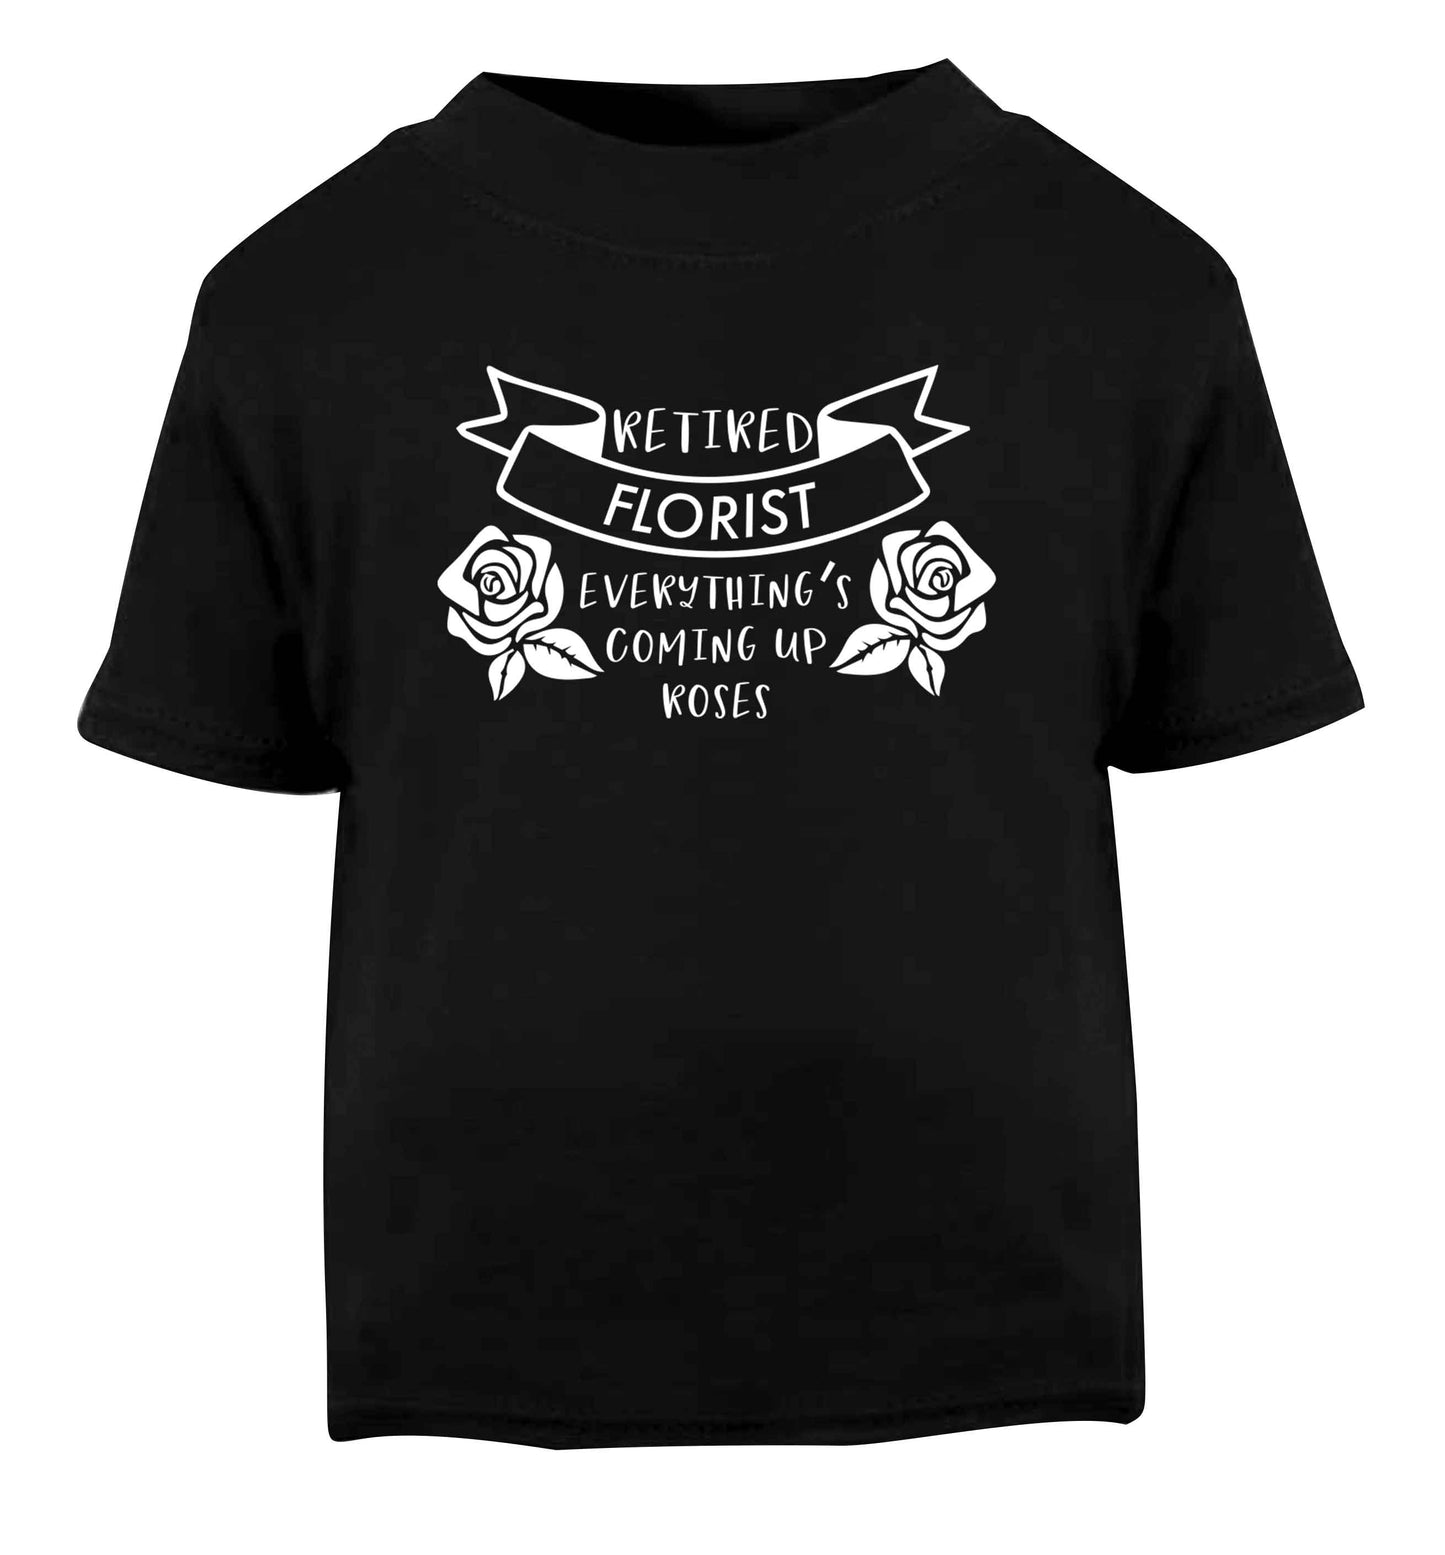 Retired florist everything's coming up roses Black Baby Toddler Tshirt 2 years